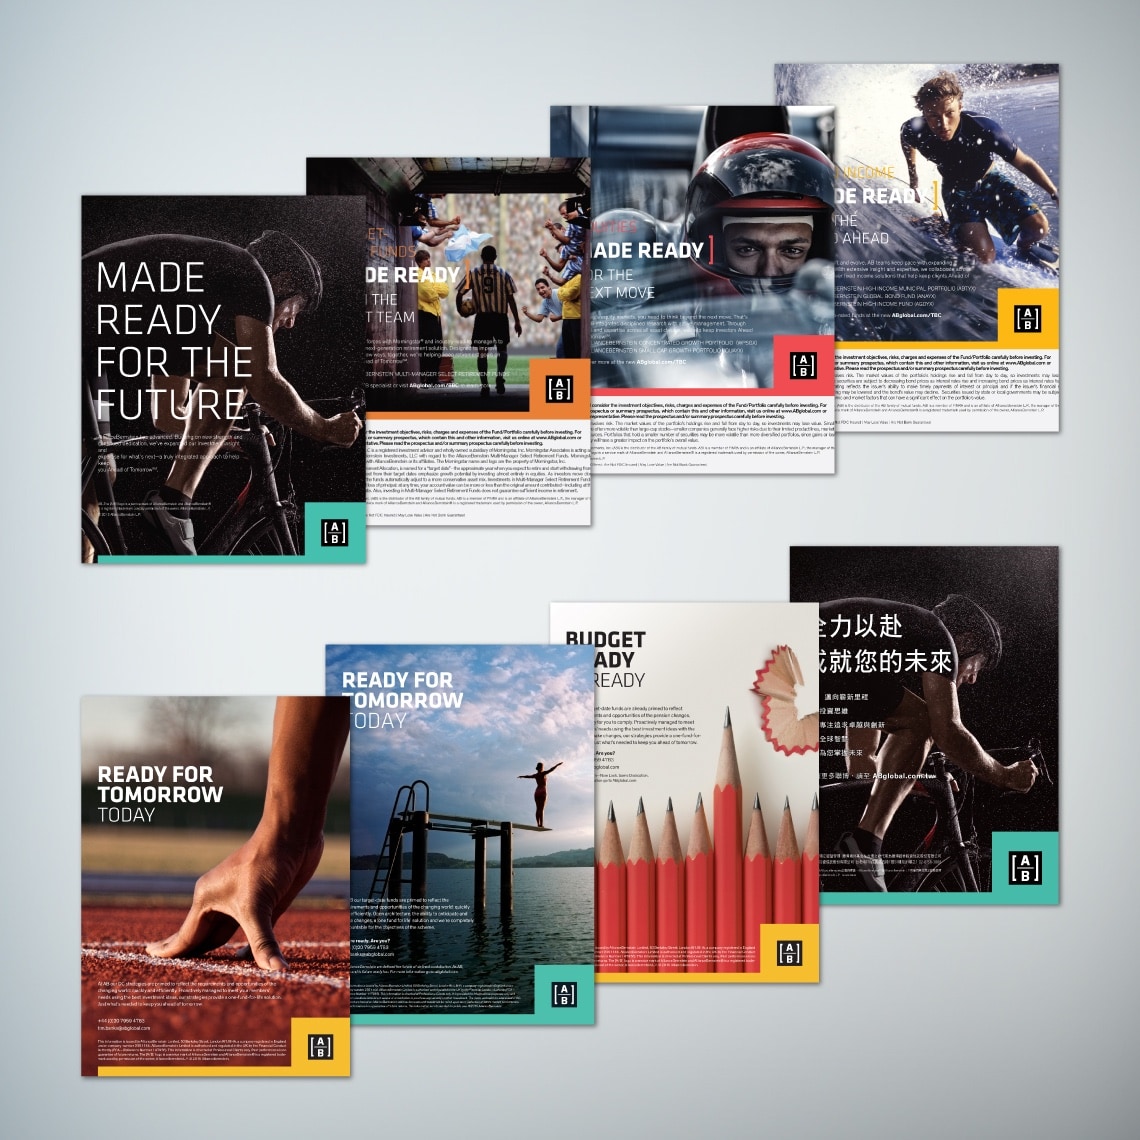 examples of the Global Advertising Campaign material developed for AB (AllianceBernstein)